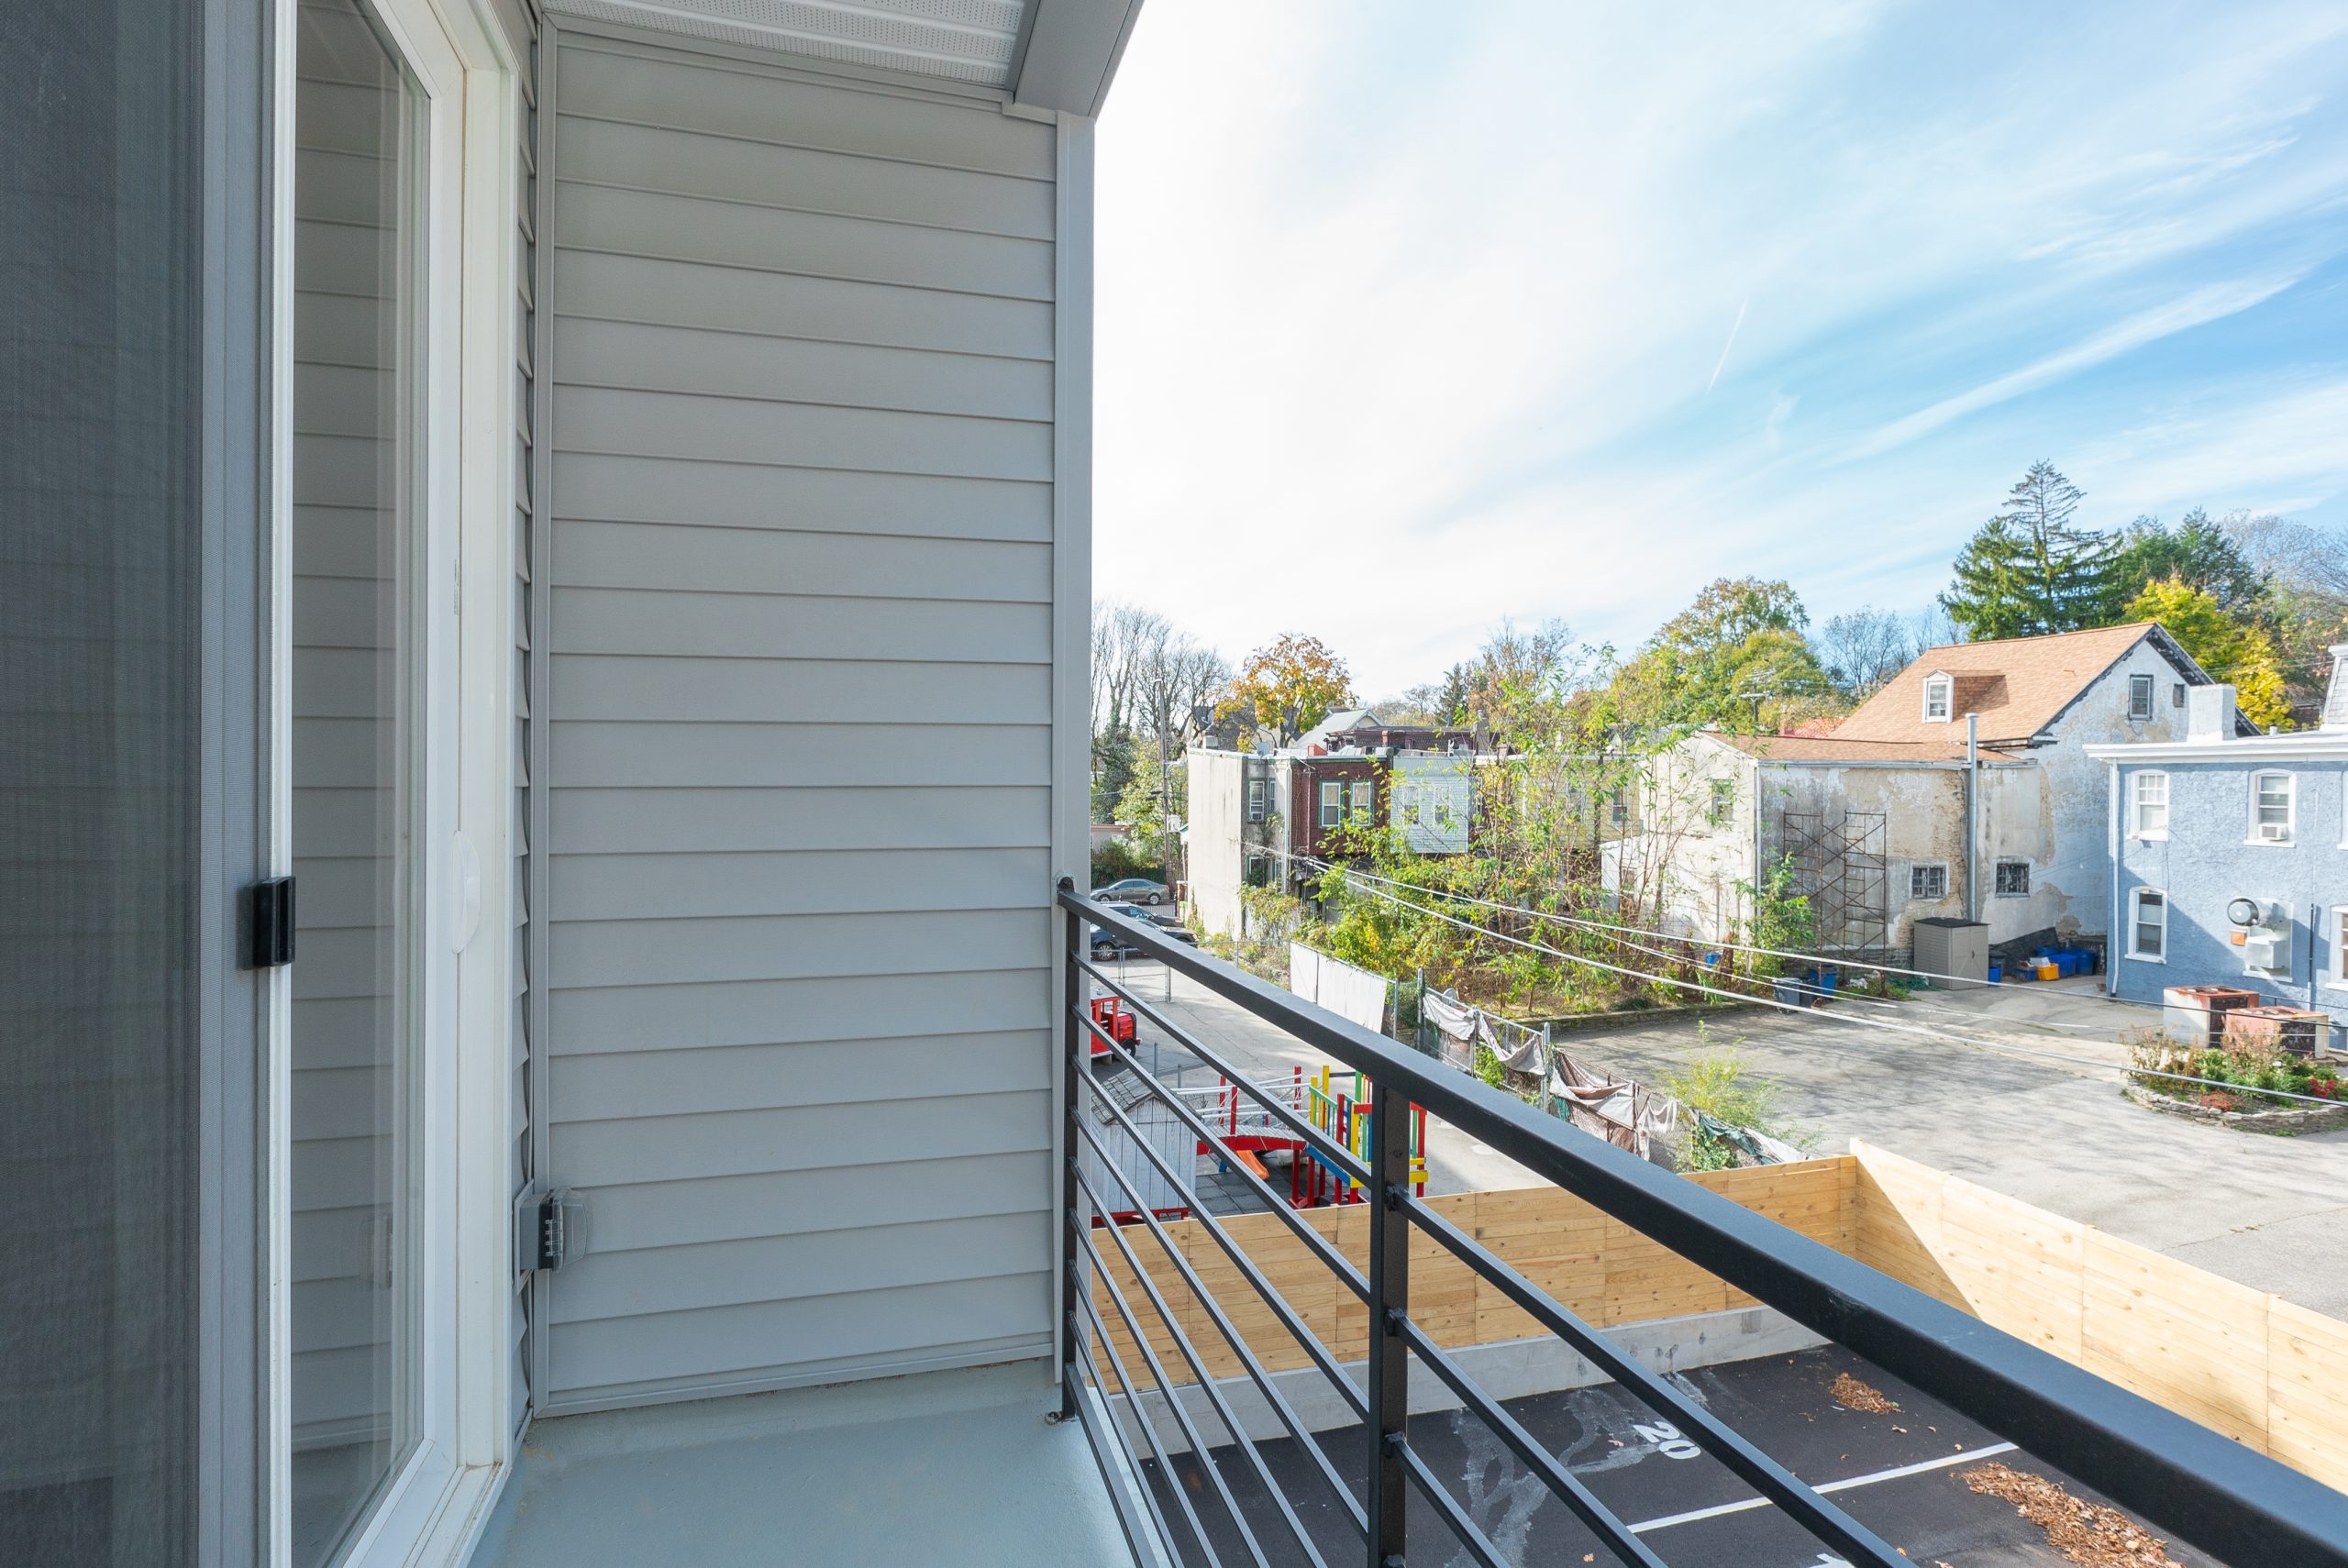 GERMANTOWN SQUARE UNIT 309 LINCOLN WEFILMPHILLY-07796